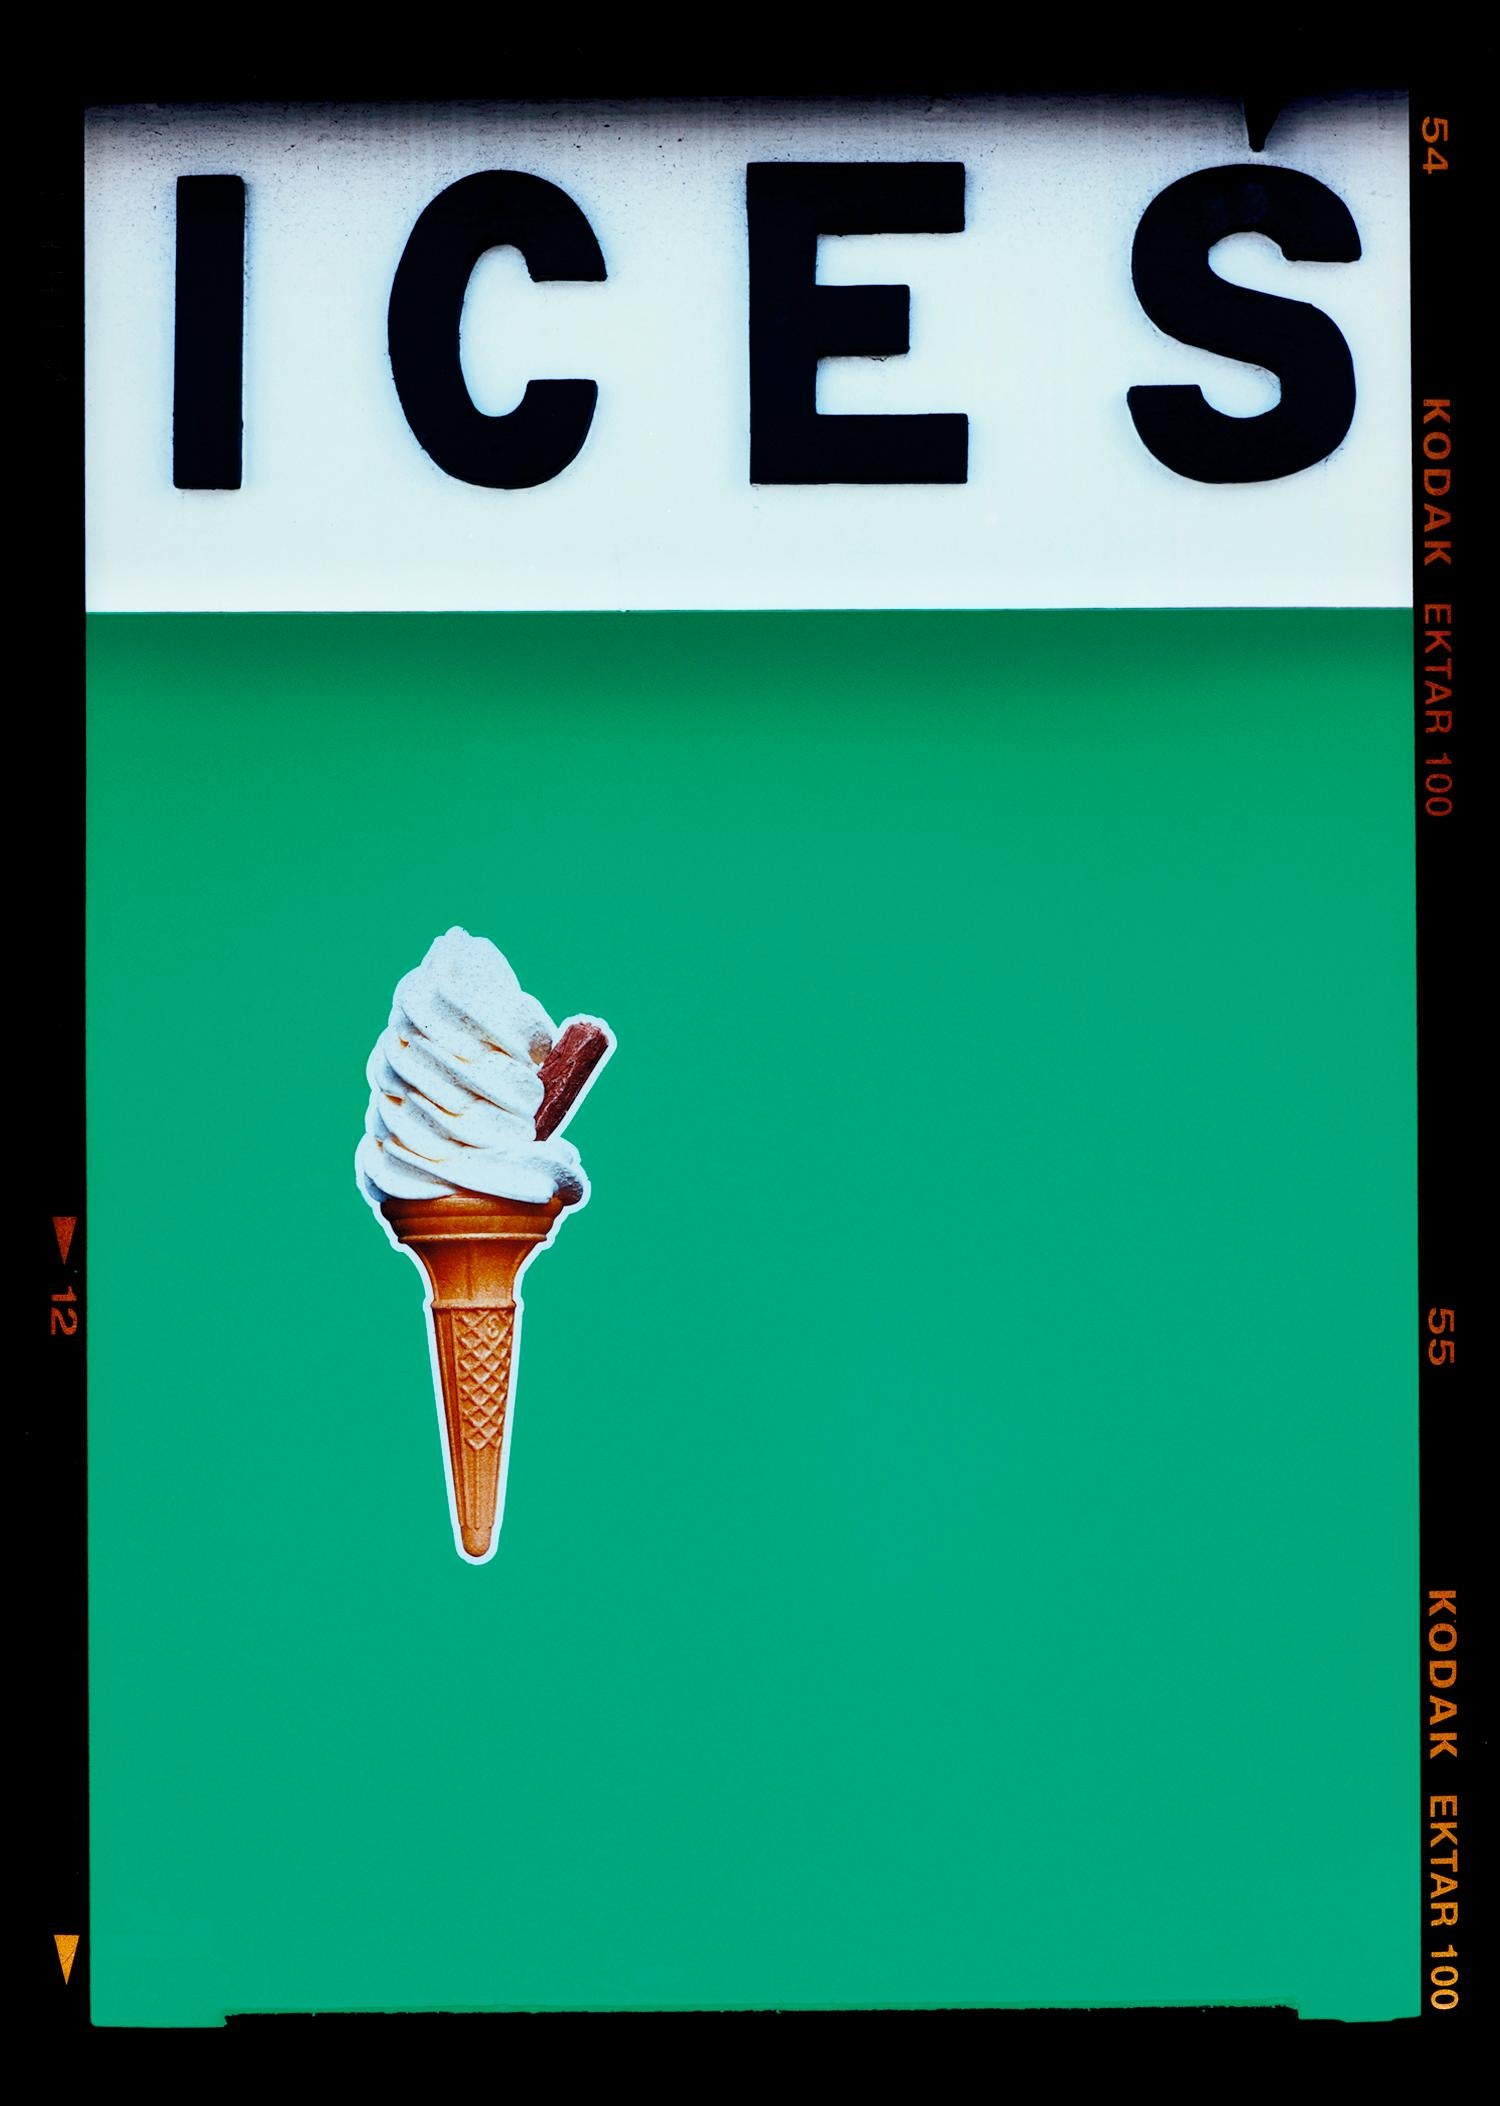 Richard Heeps Print - Ices (Viridian Green), Bexhill-on-Sea - British seaside color photography